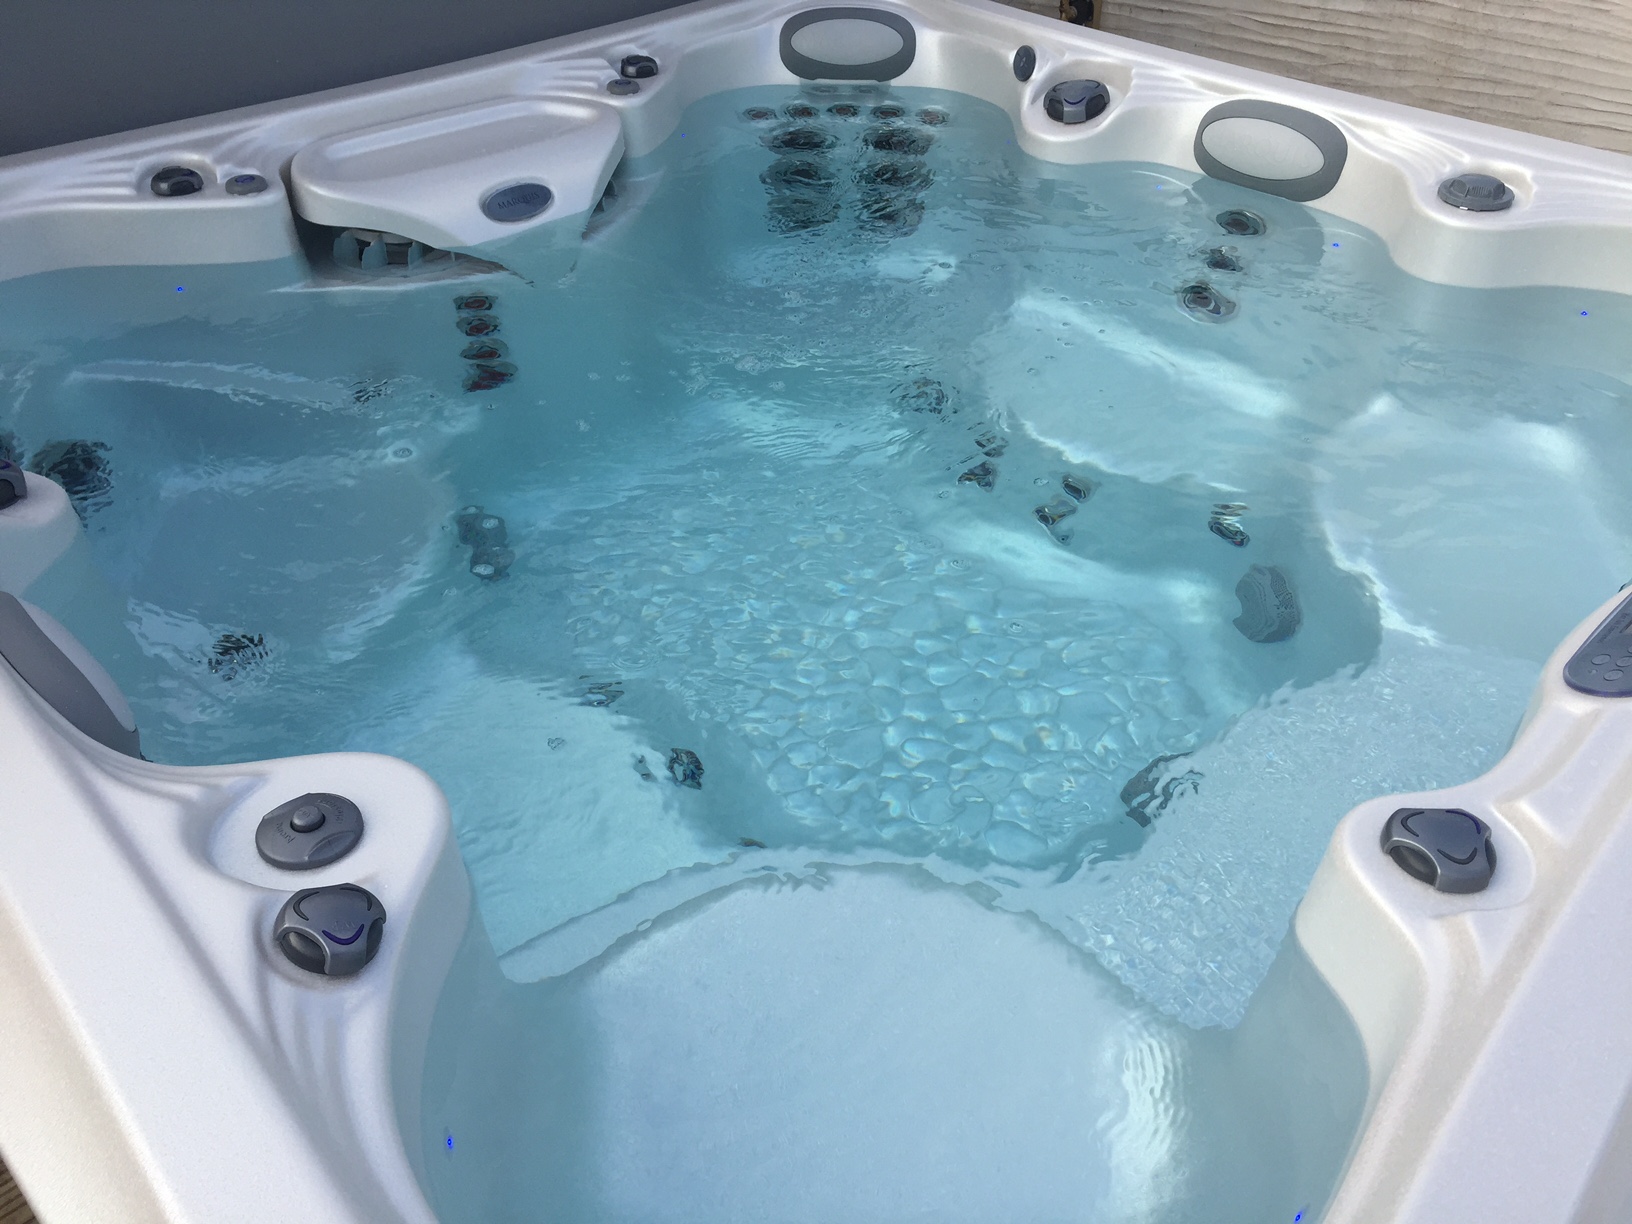 Marquis Spas Crown Euphoria Hot Tub close up image of inside filled with water